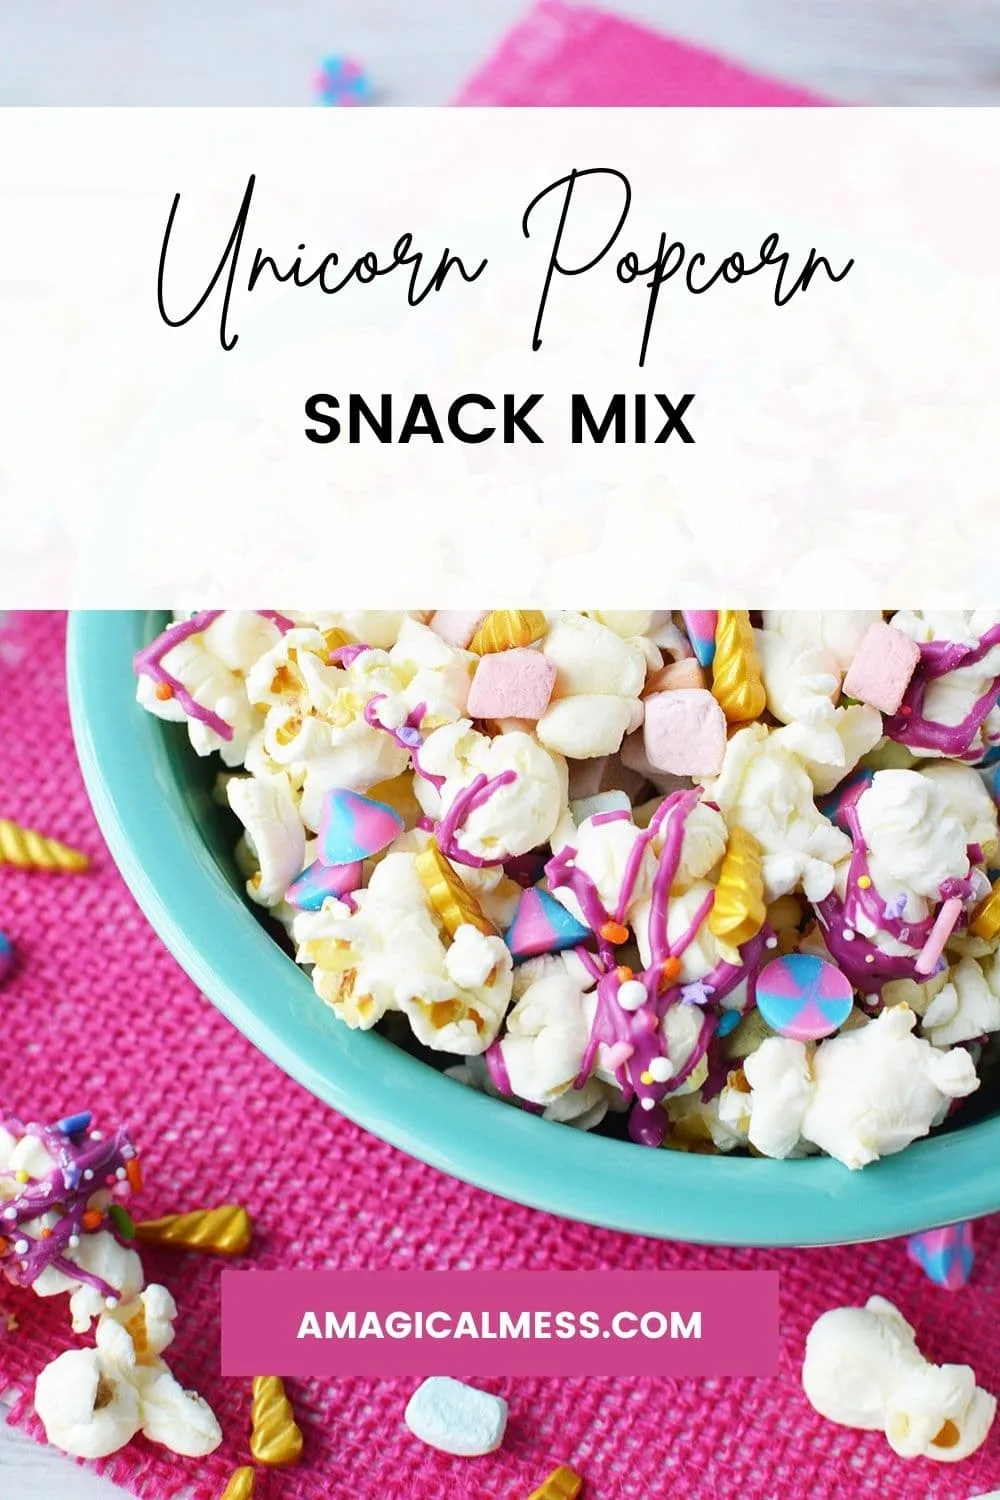 Bowl full of unicorn popcorn with colorful candy and gold horns.